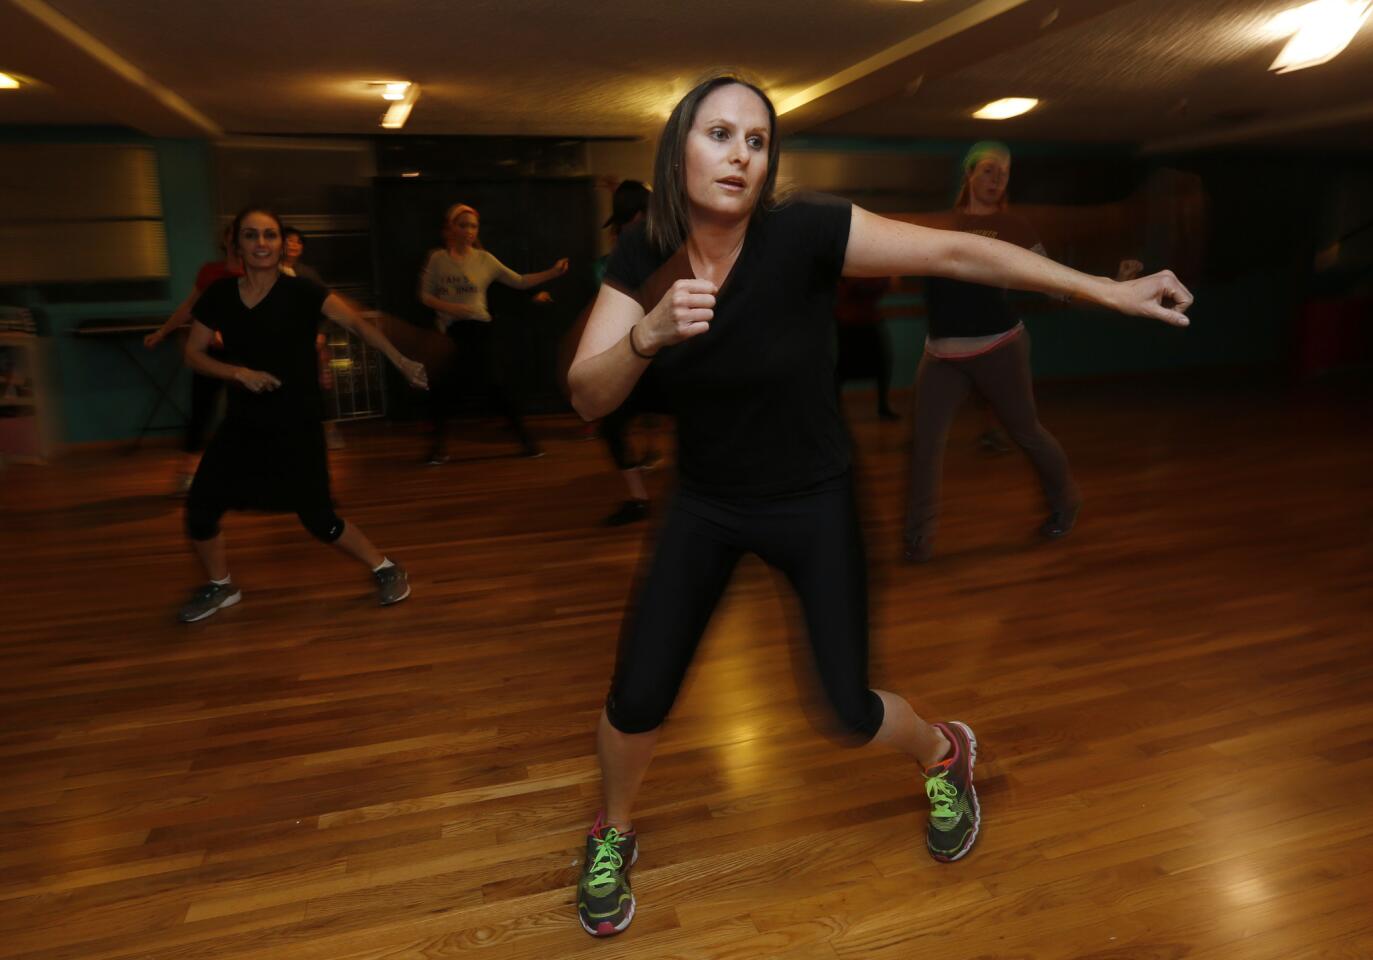 Rachel Victor leads a cross-cardio dance session that caters to Orthodox Jewish women.